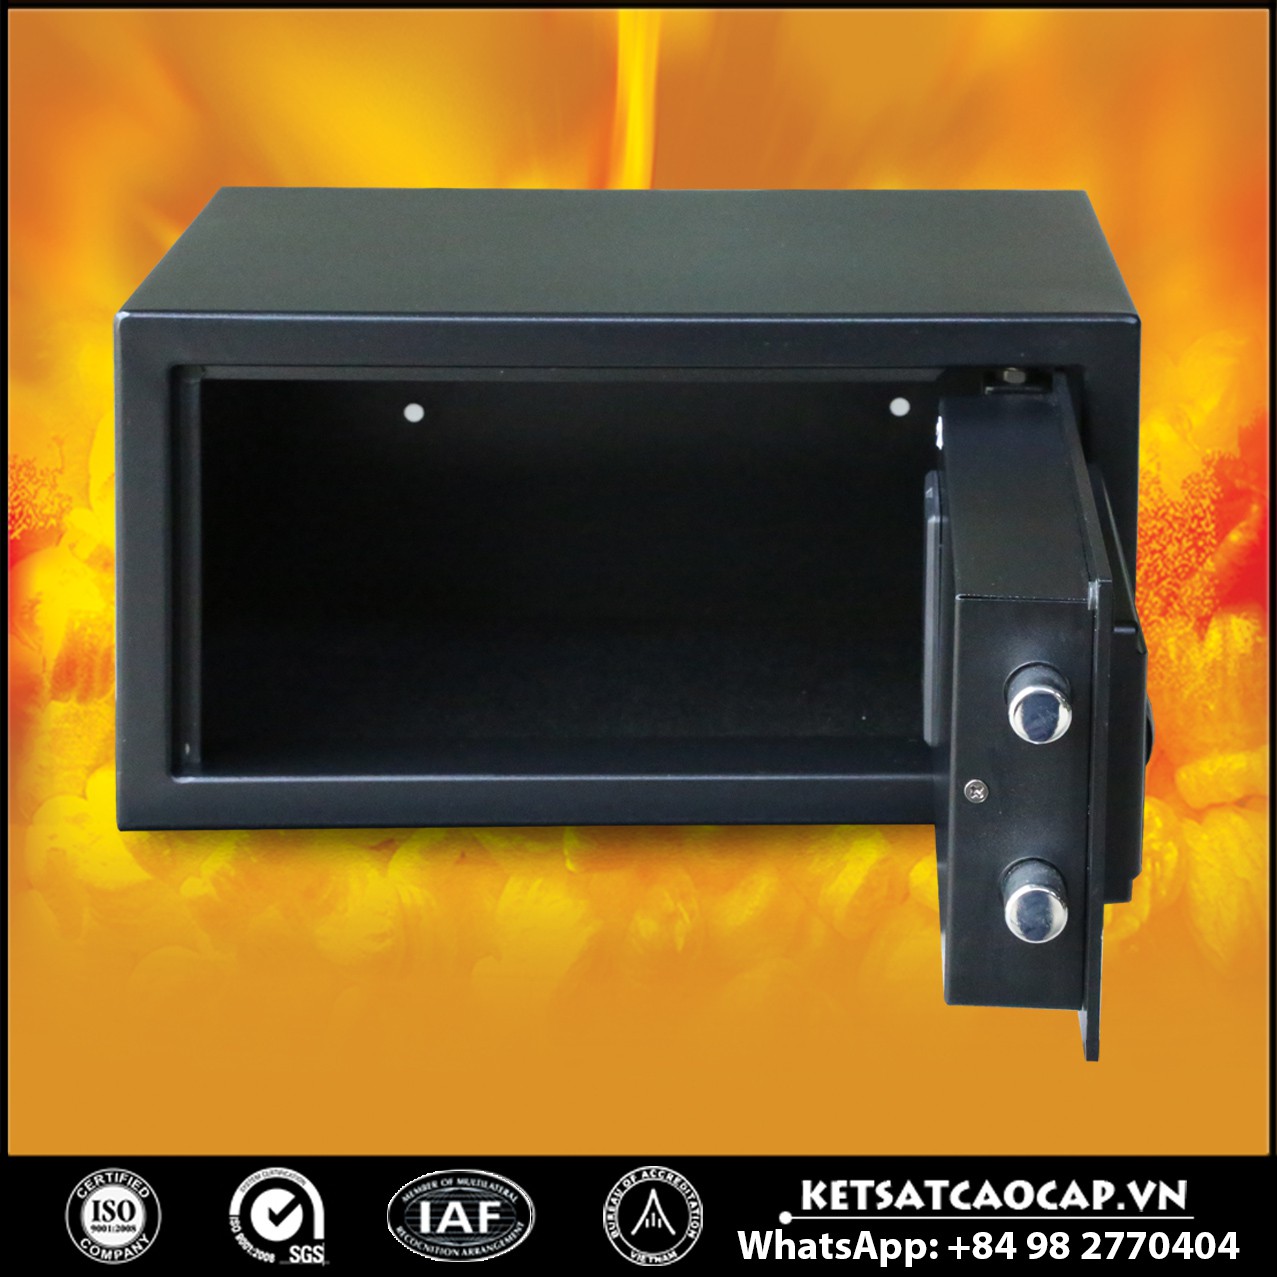 Hotel Room Safe Manufacturers & Suppliers‎